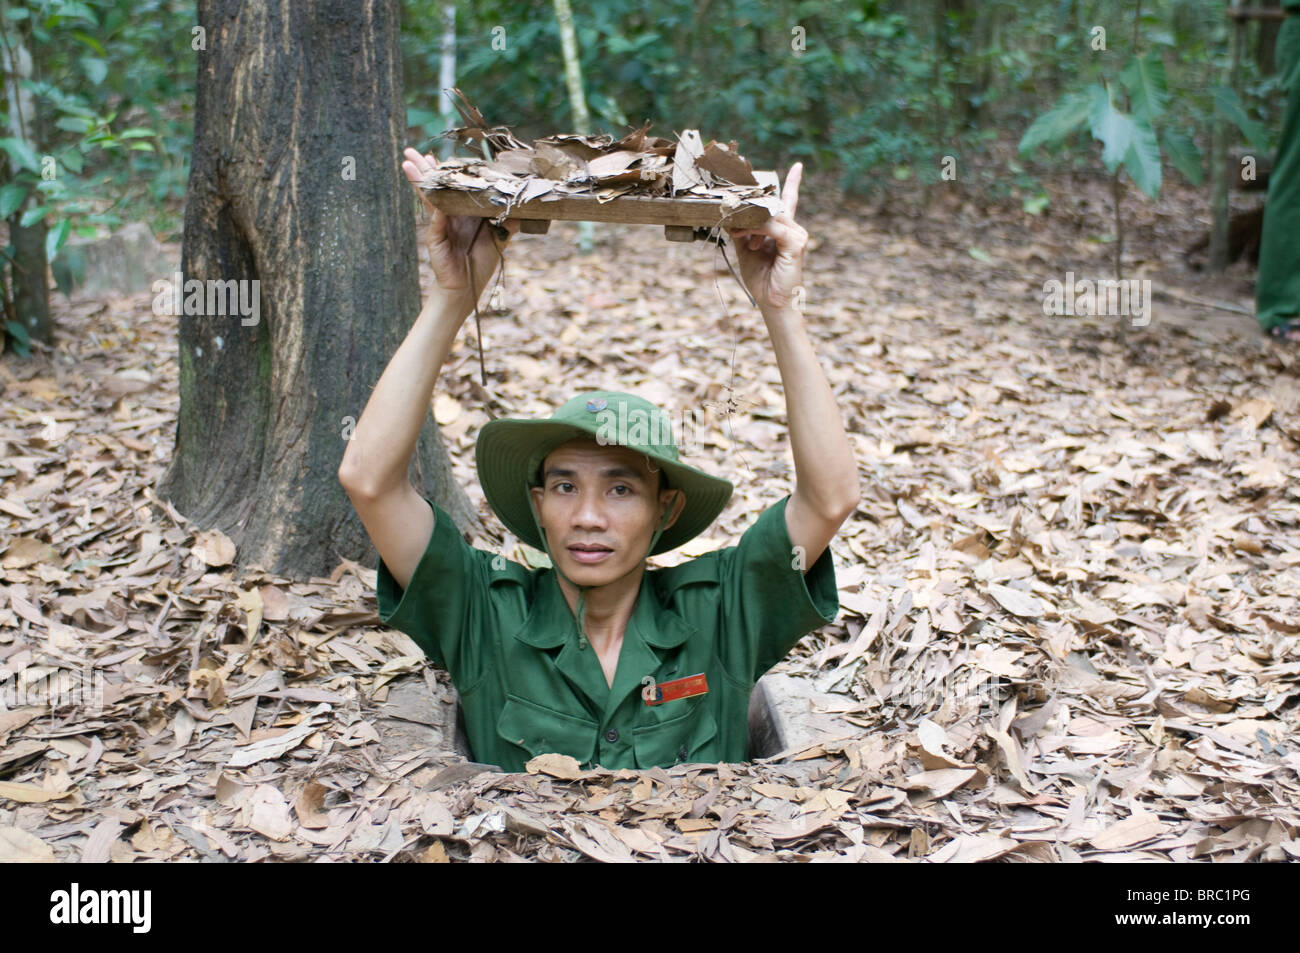 Soldier showing the entrance to the former Viet Cong tunnels of ChuChi, near Saigon, Vietnam, Indochina Stock Photo